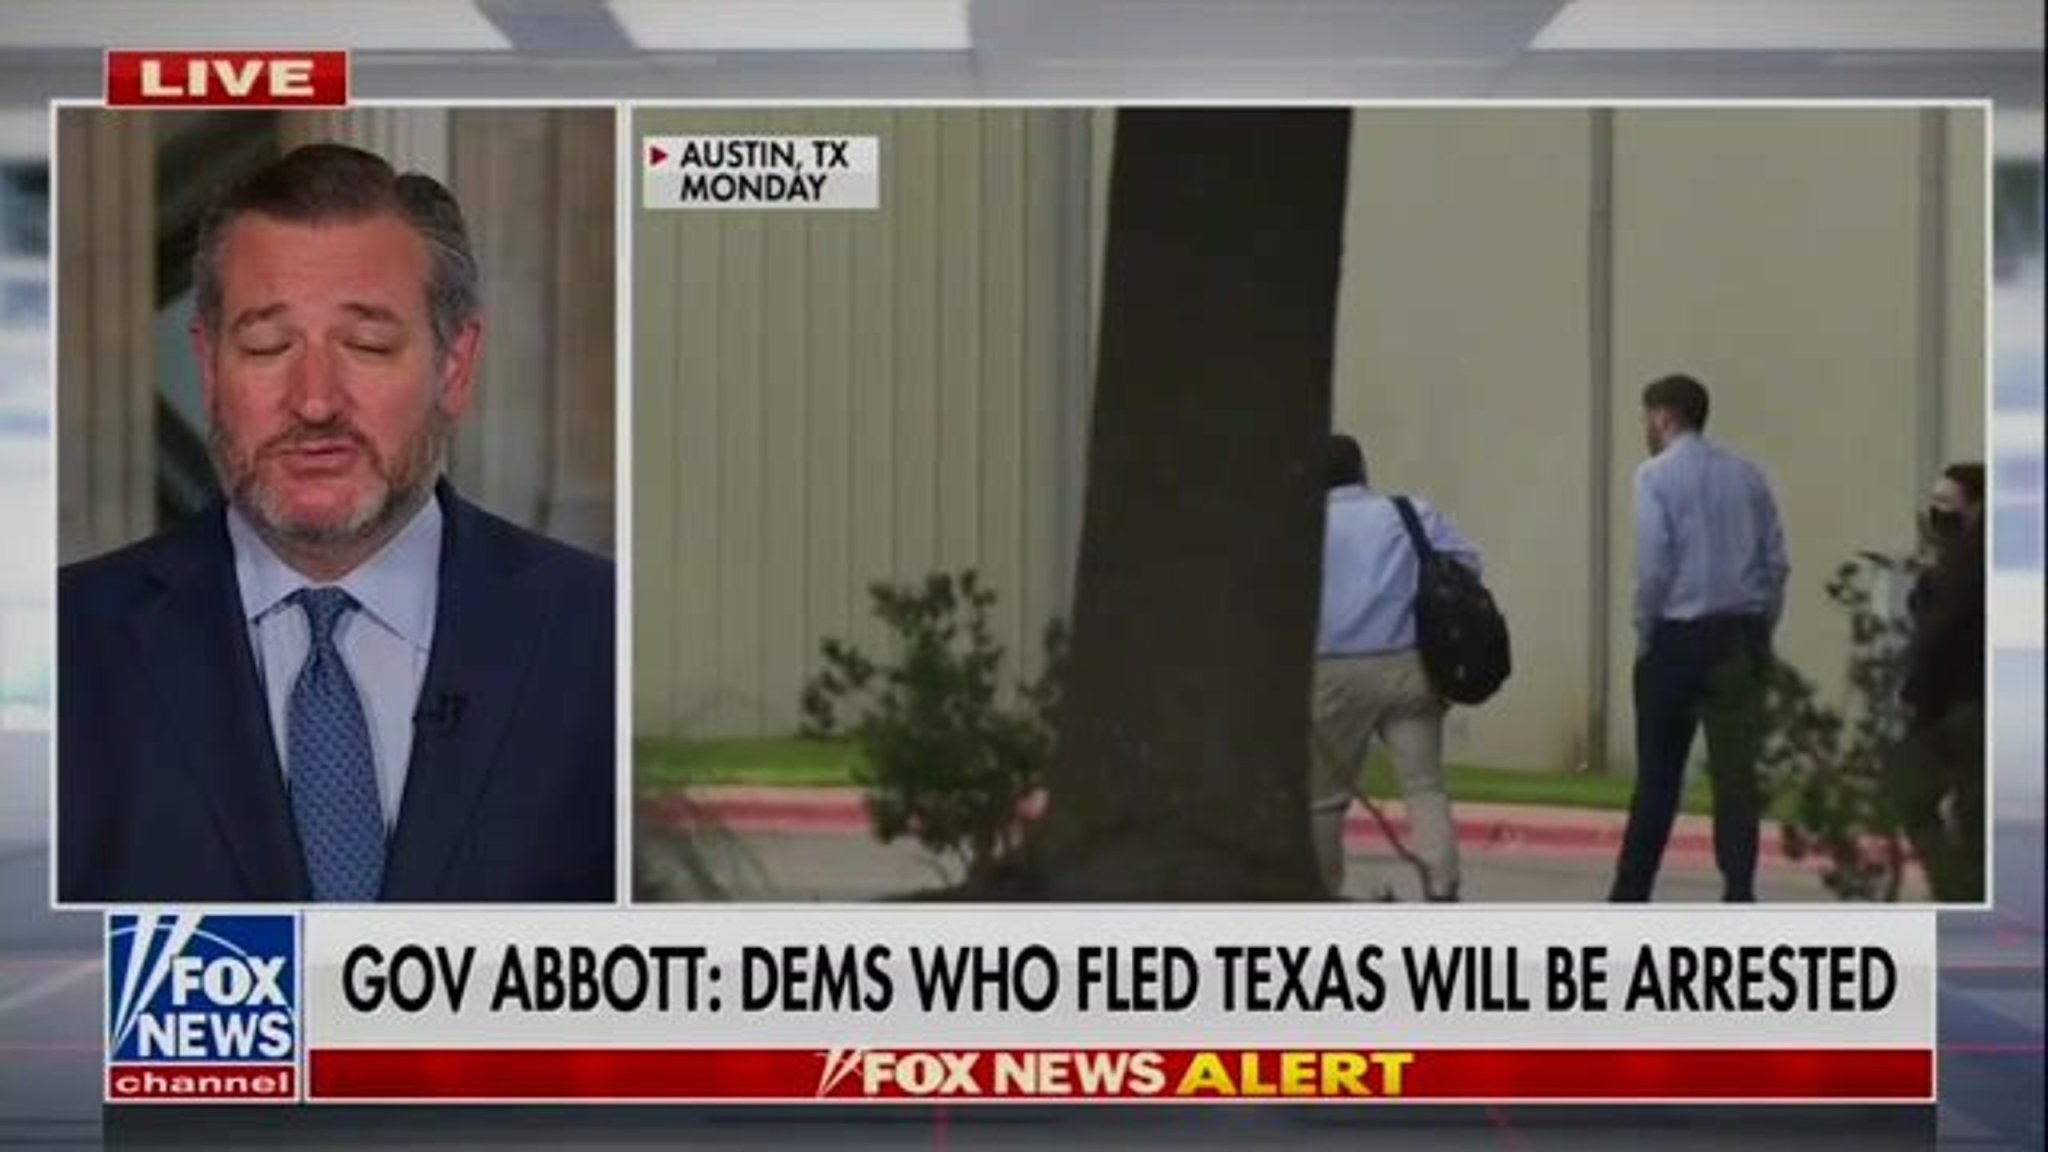 Sen Cruz (R-TX) says Texas Dems pulled a “political stunt” and equates Voter ID laws to showing ID to board an airplane.